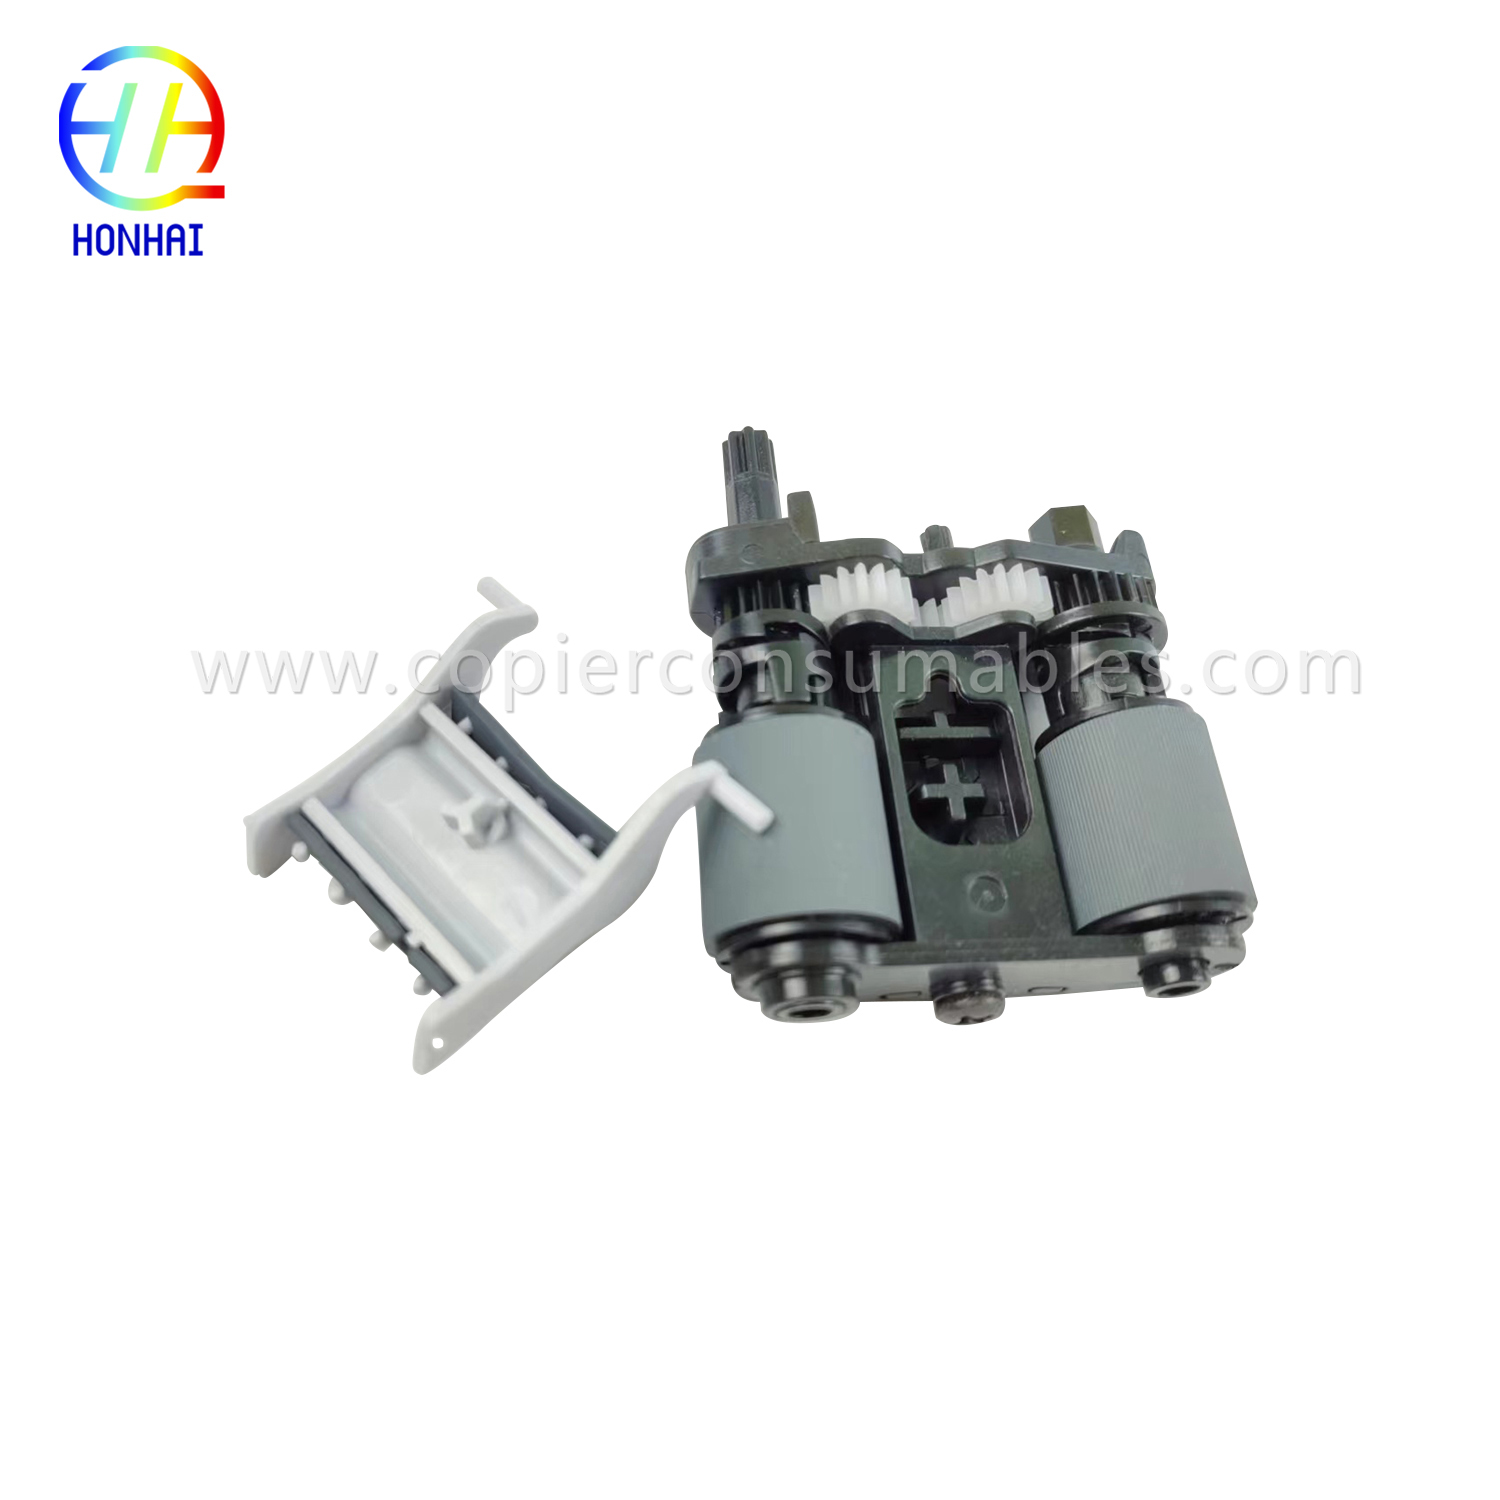 ADF Pickup Roller Assembly for HP Color LaserJet Pro MFP M281fdw M377dw M477fdn M477fdw M477fnw M426fdn M426fdw B3Q10-60105